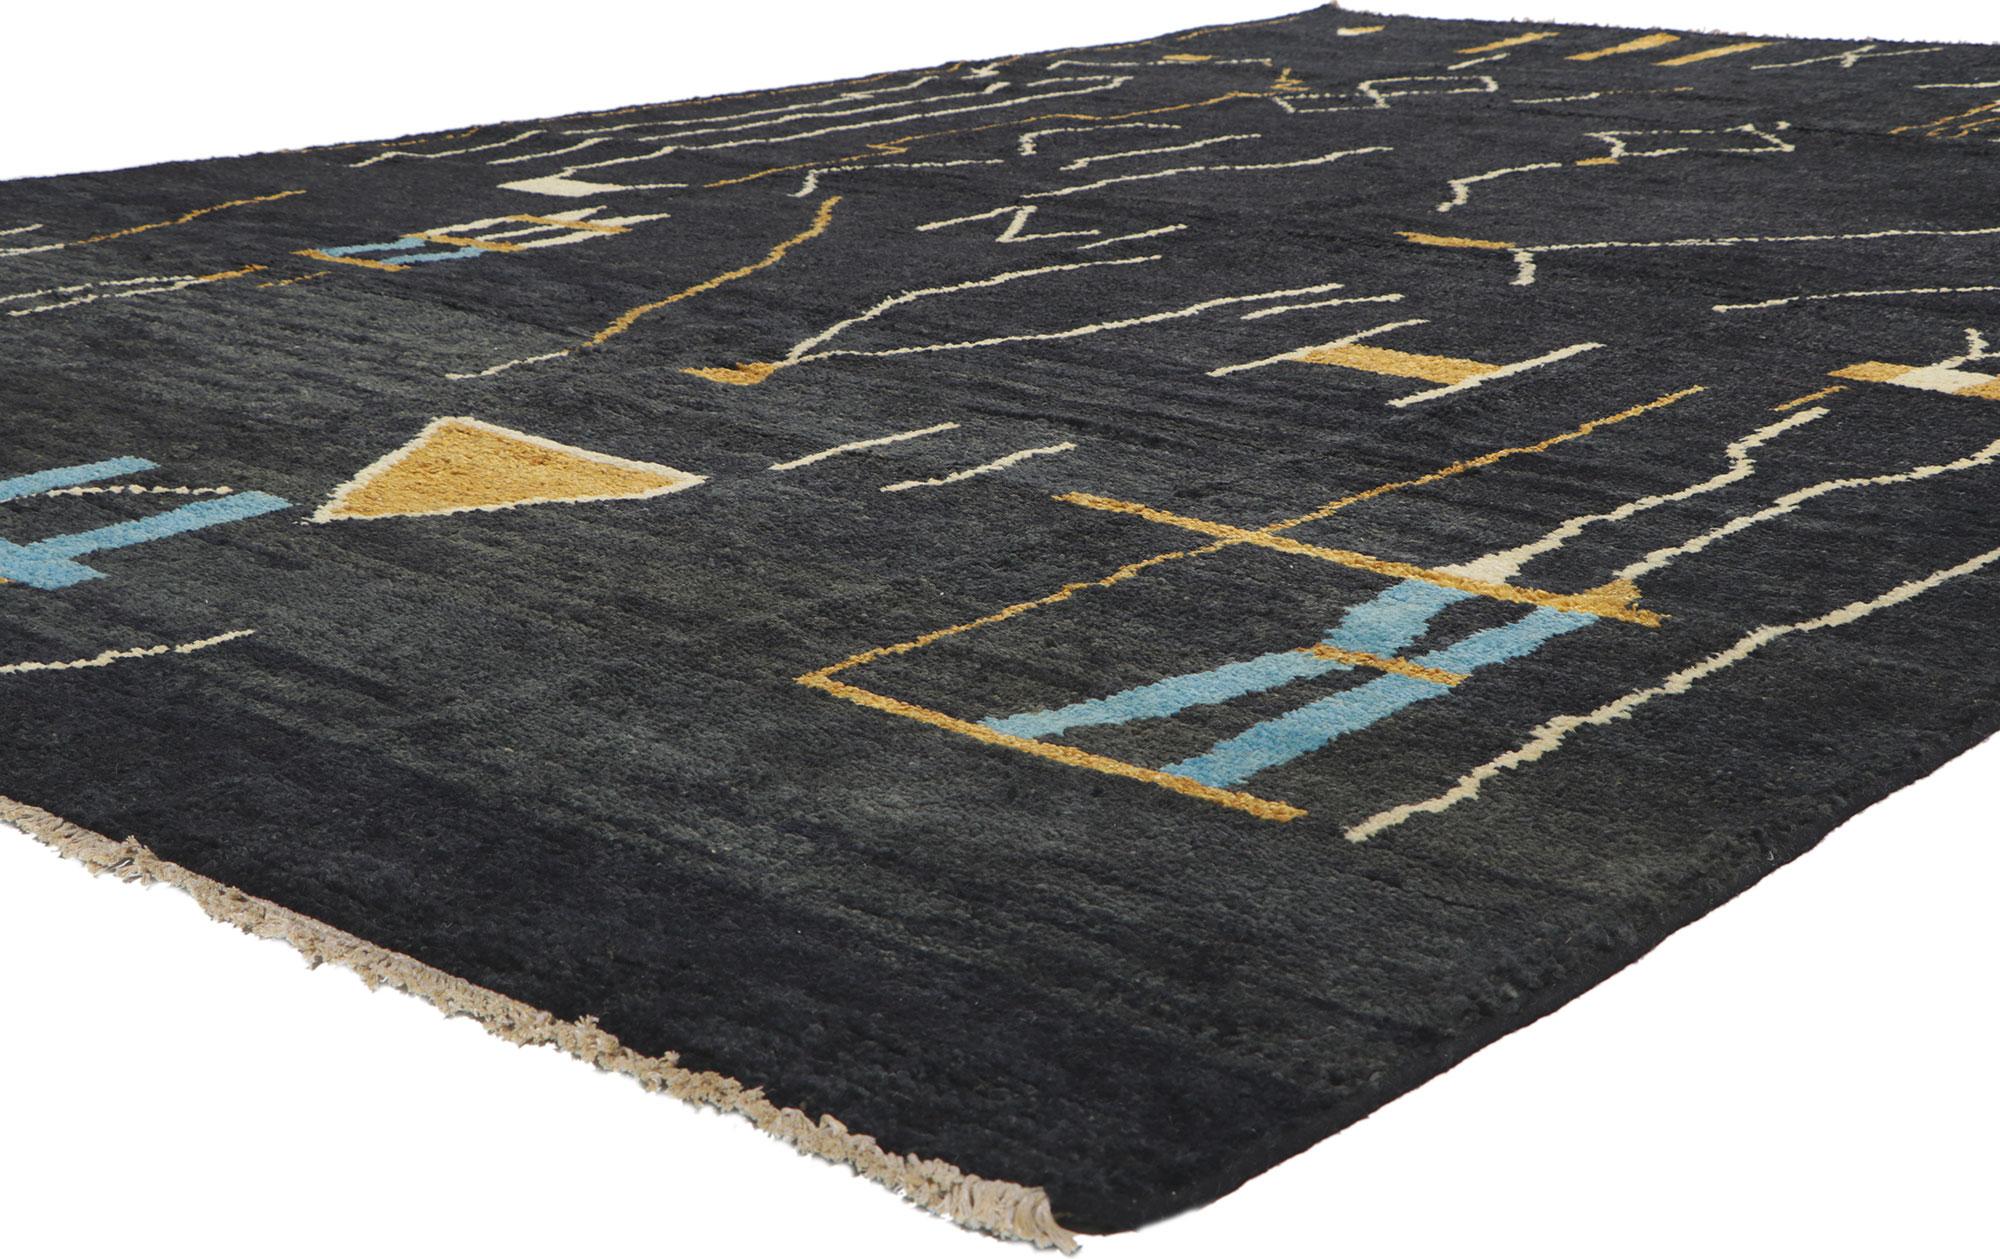 80705 New Contemporary Moroccan rug with Tribal Style 09'06 x 13'02. Showcasing an expressive tribal design, incredible detail and texture, this hand knotted wool contemporary Moroccan area rug is a captivating vision of woven beauty. The bold